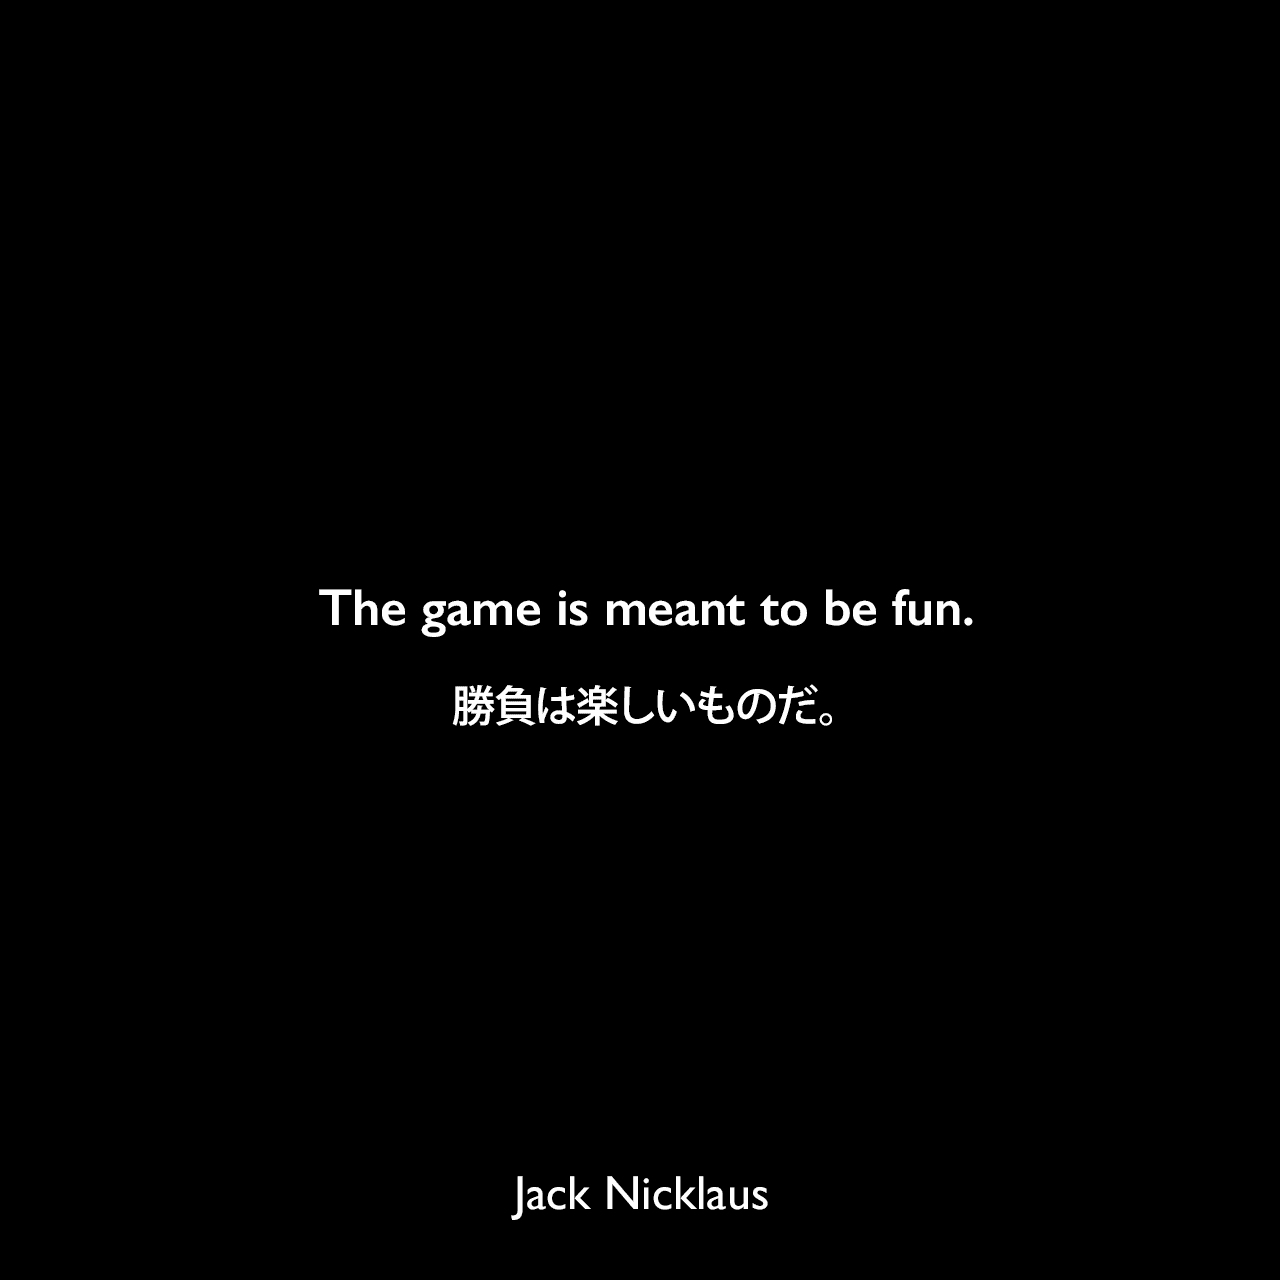 The game is meant to be fun.勝負は楽しいものだ。Jack Nicklaus